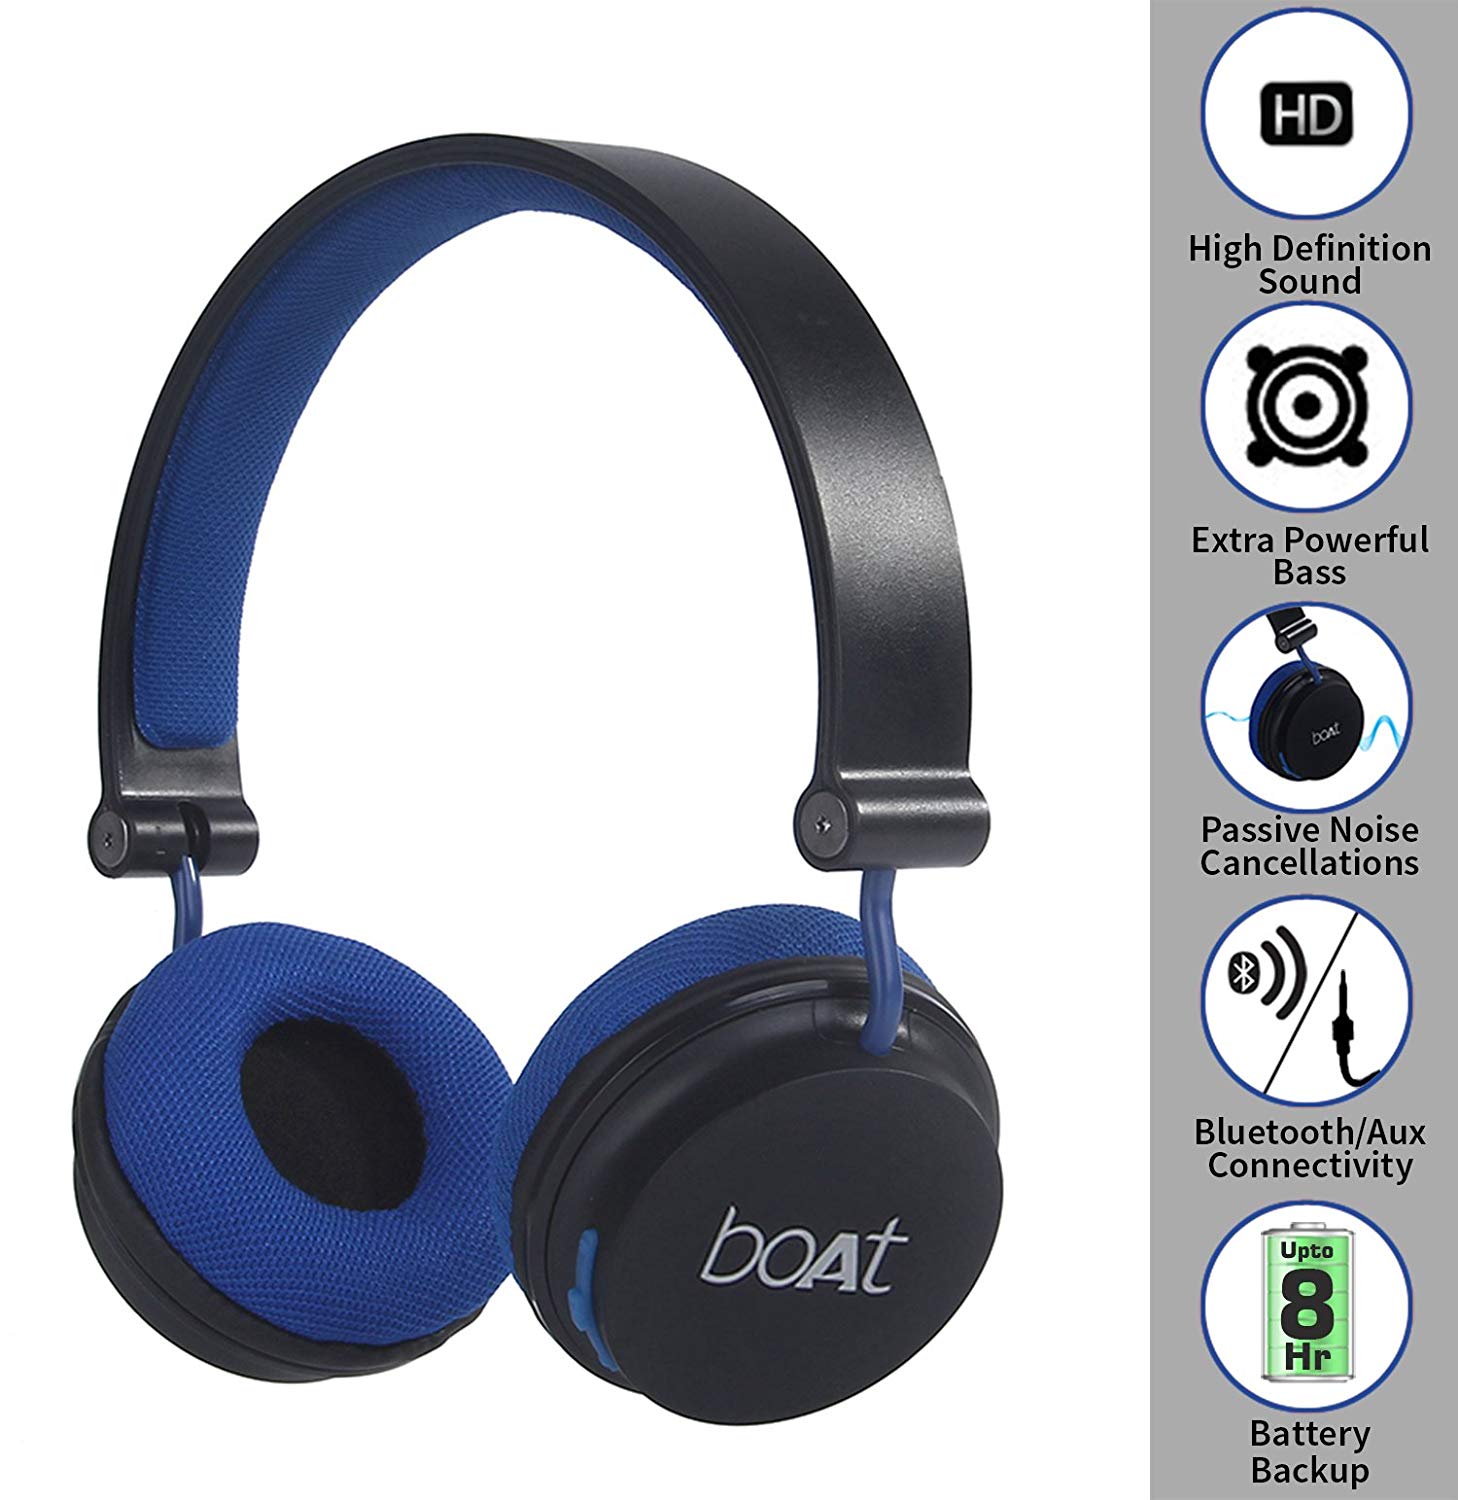 Shopclues Offers – Digimate HD Stereo Dynamic Wired Headphones – Multi Color @ Rs. 199